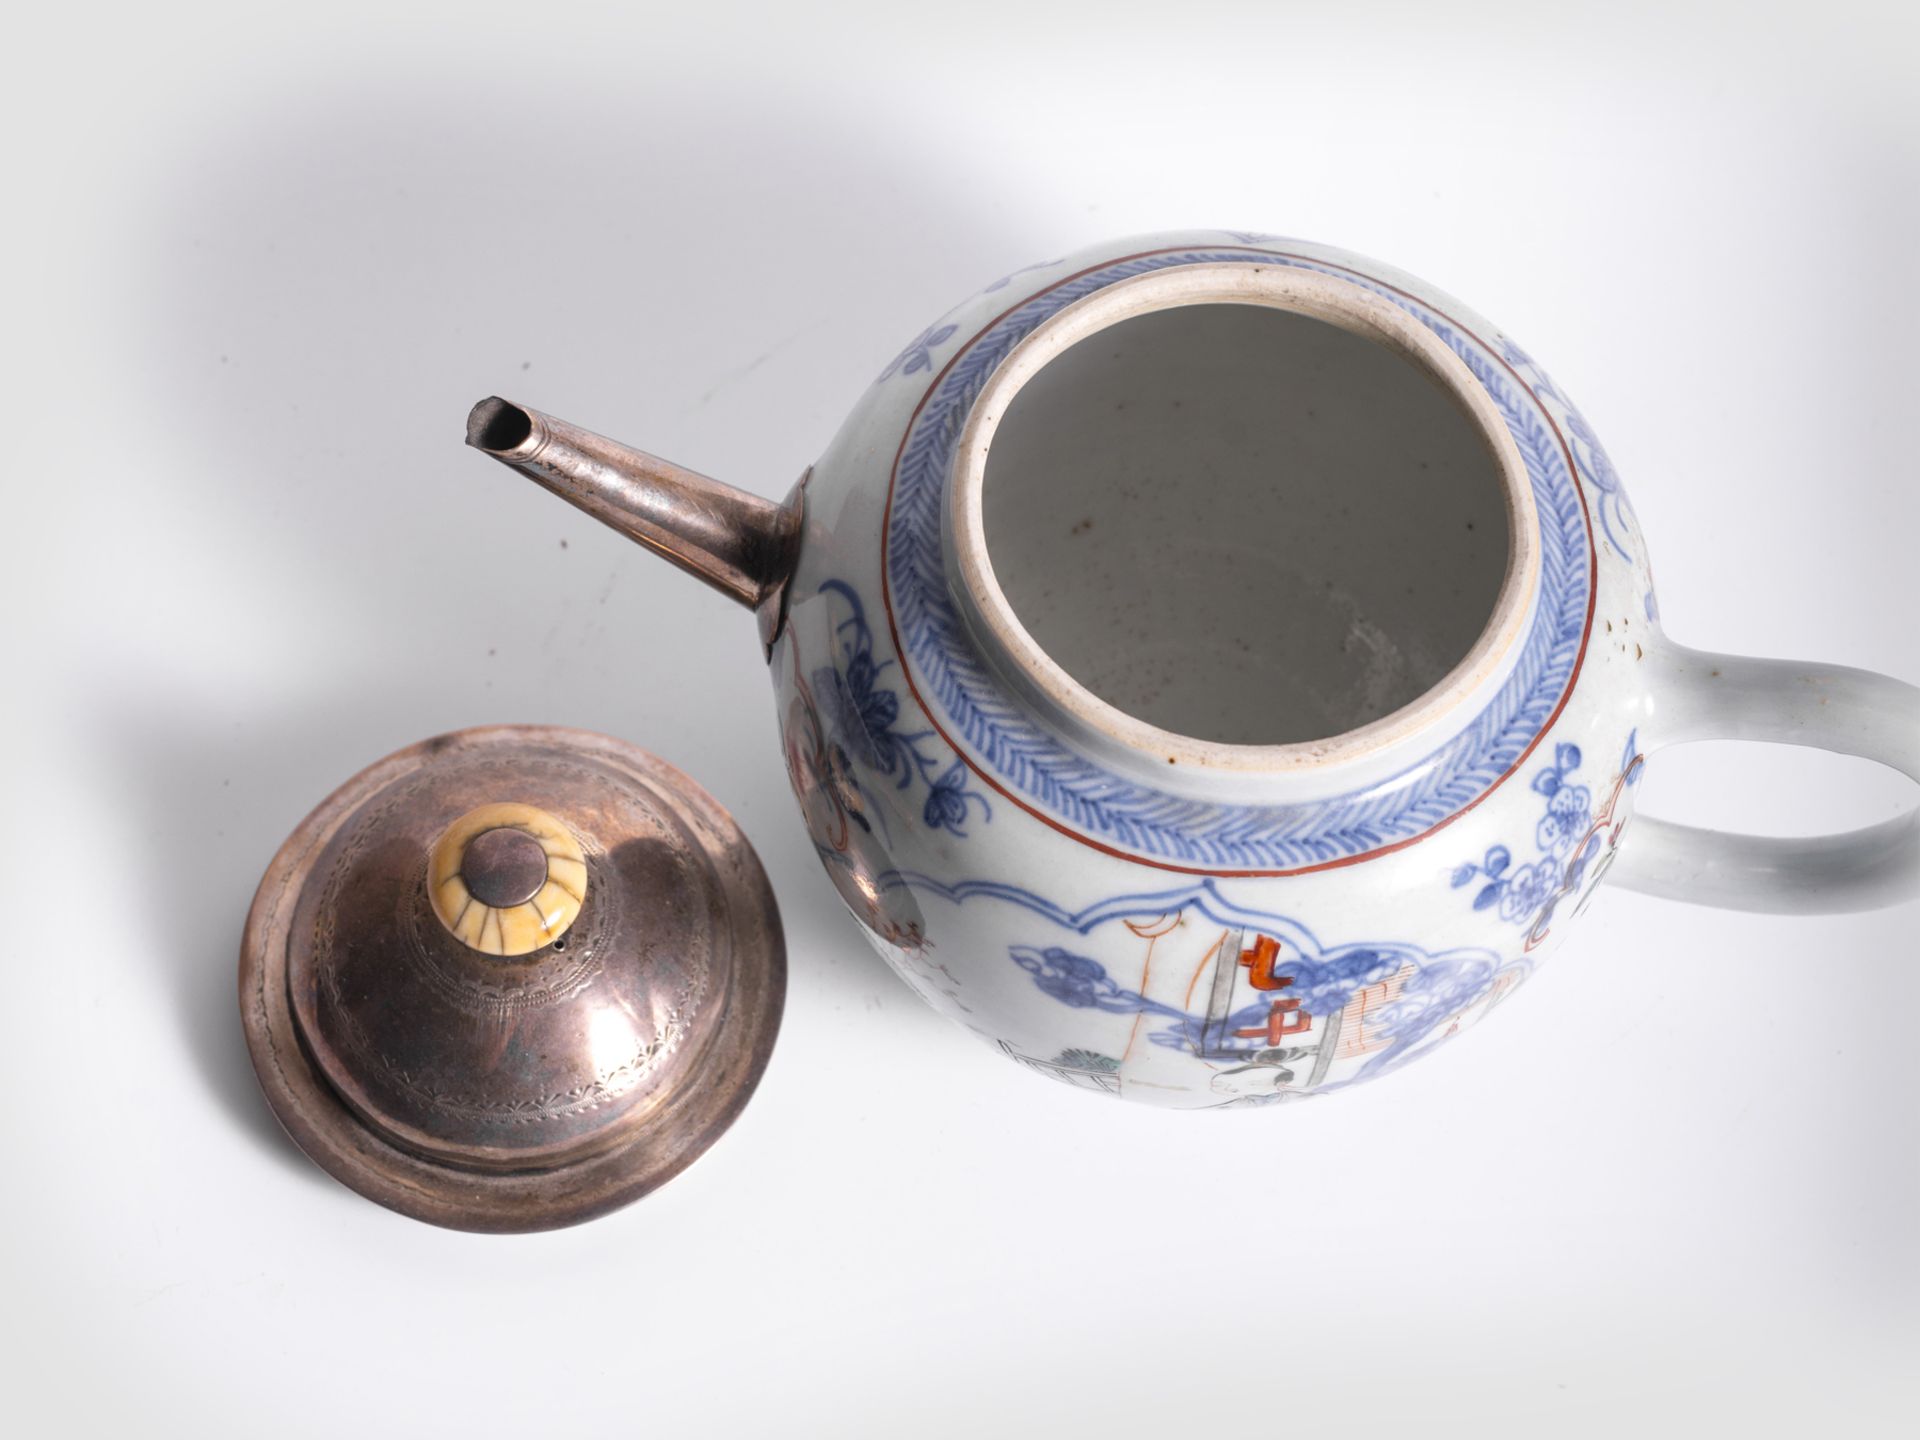 Teapot, China, Quing dynasty - Image 5 of 6